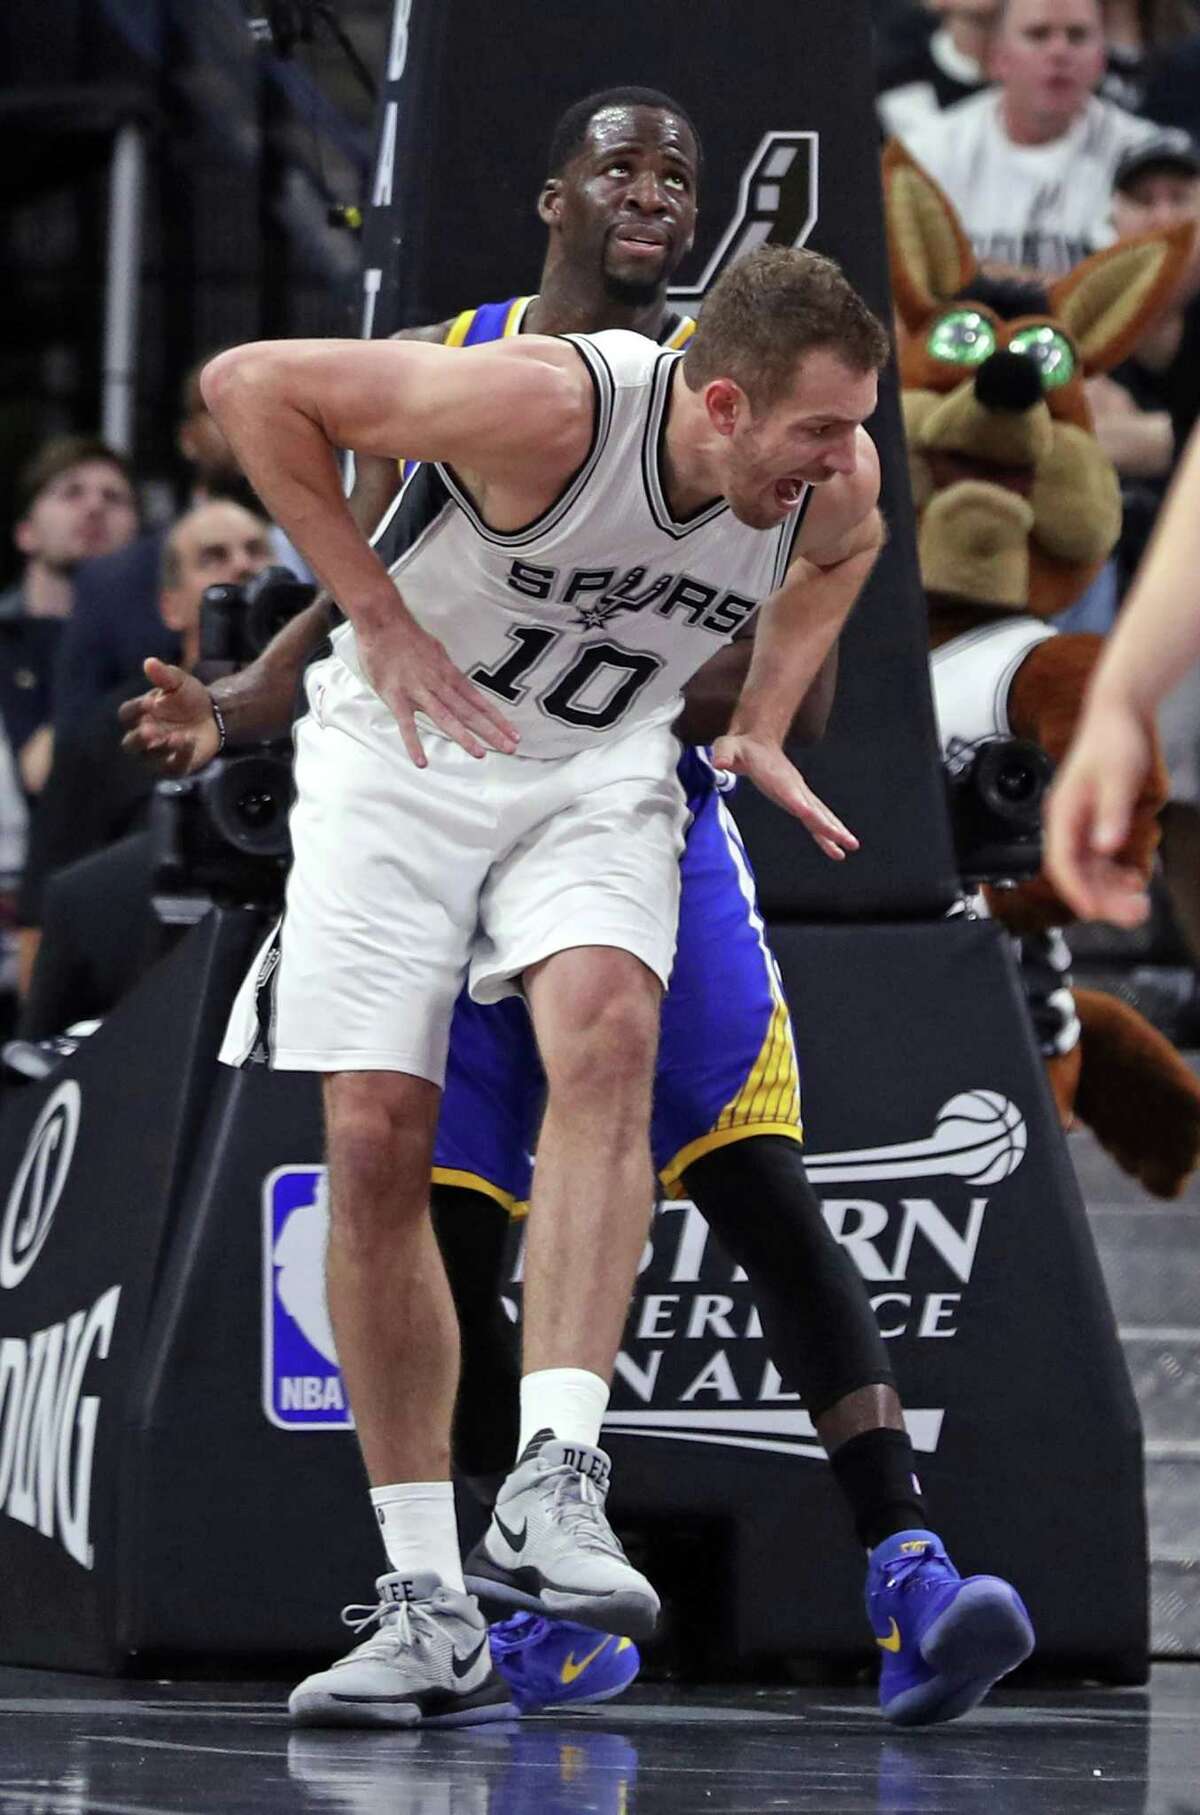 San Antonio Spurs' David Lee injures himself while trying to scoring against Golden State Warriors' Draymond Green in 1st quarter of Warriors' 120-108 win during Game 3 of NBA Western Conference Finals at AT&T Center in San Antonio, Texas, on Saturday, May 20, 2017.